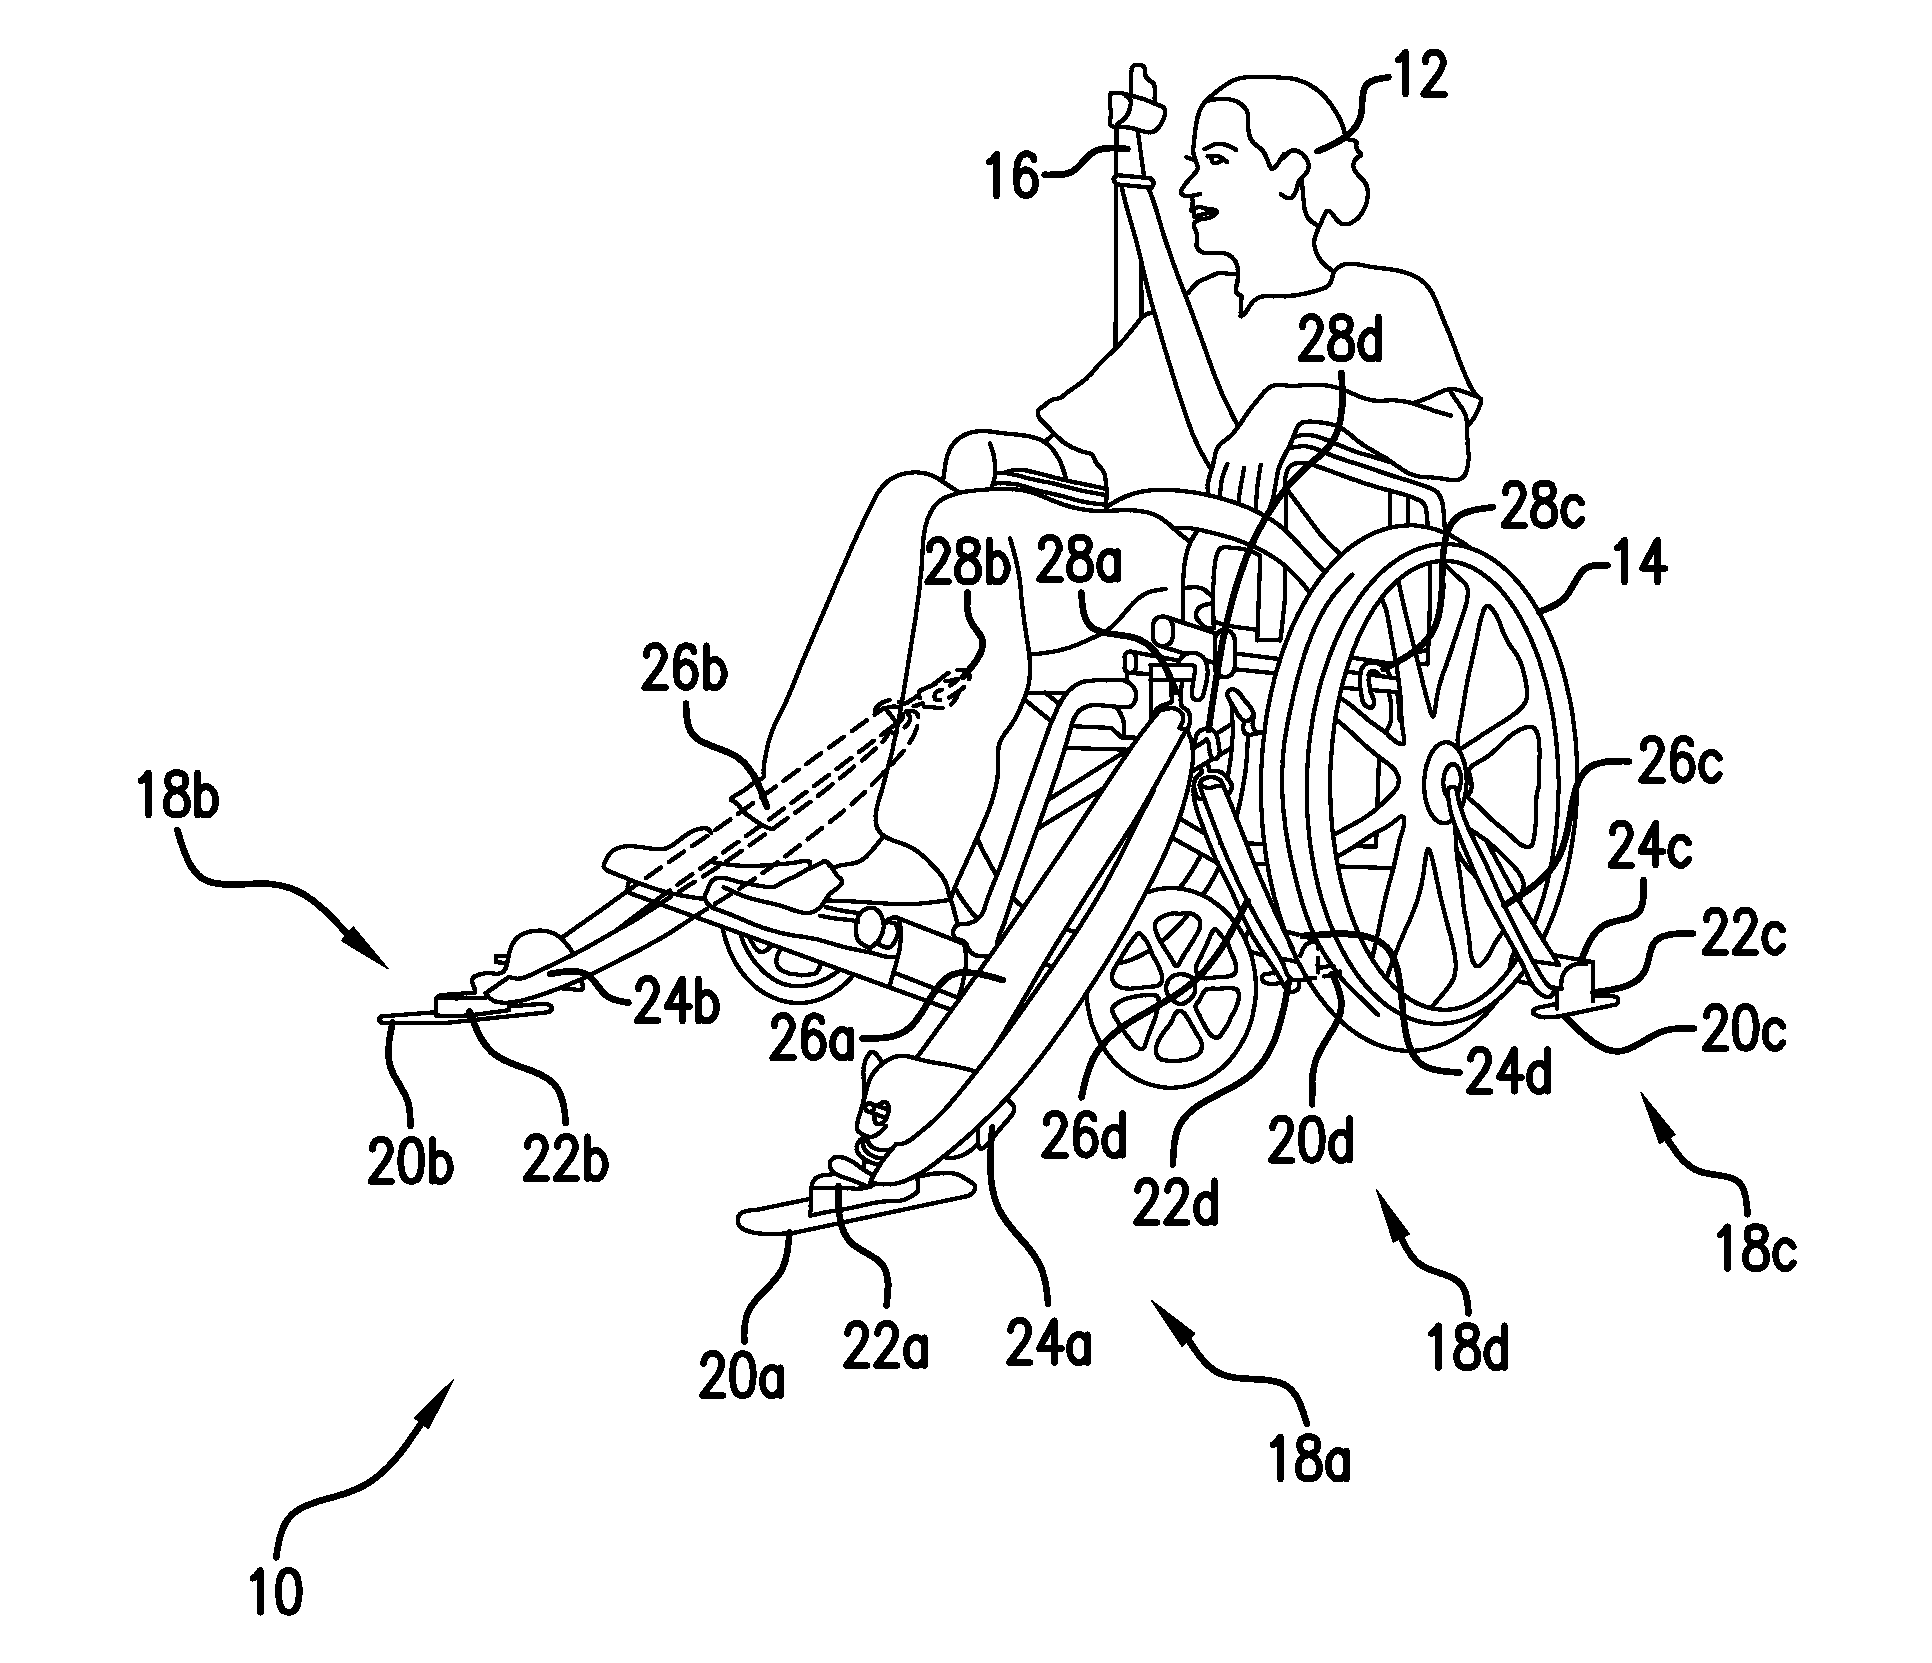 Wheelchair Securement System and Device